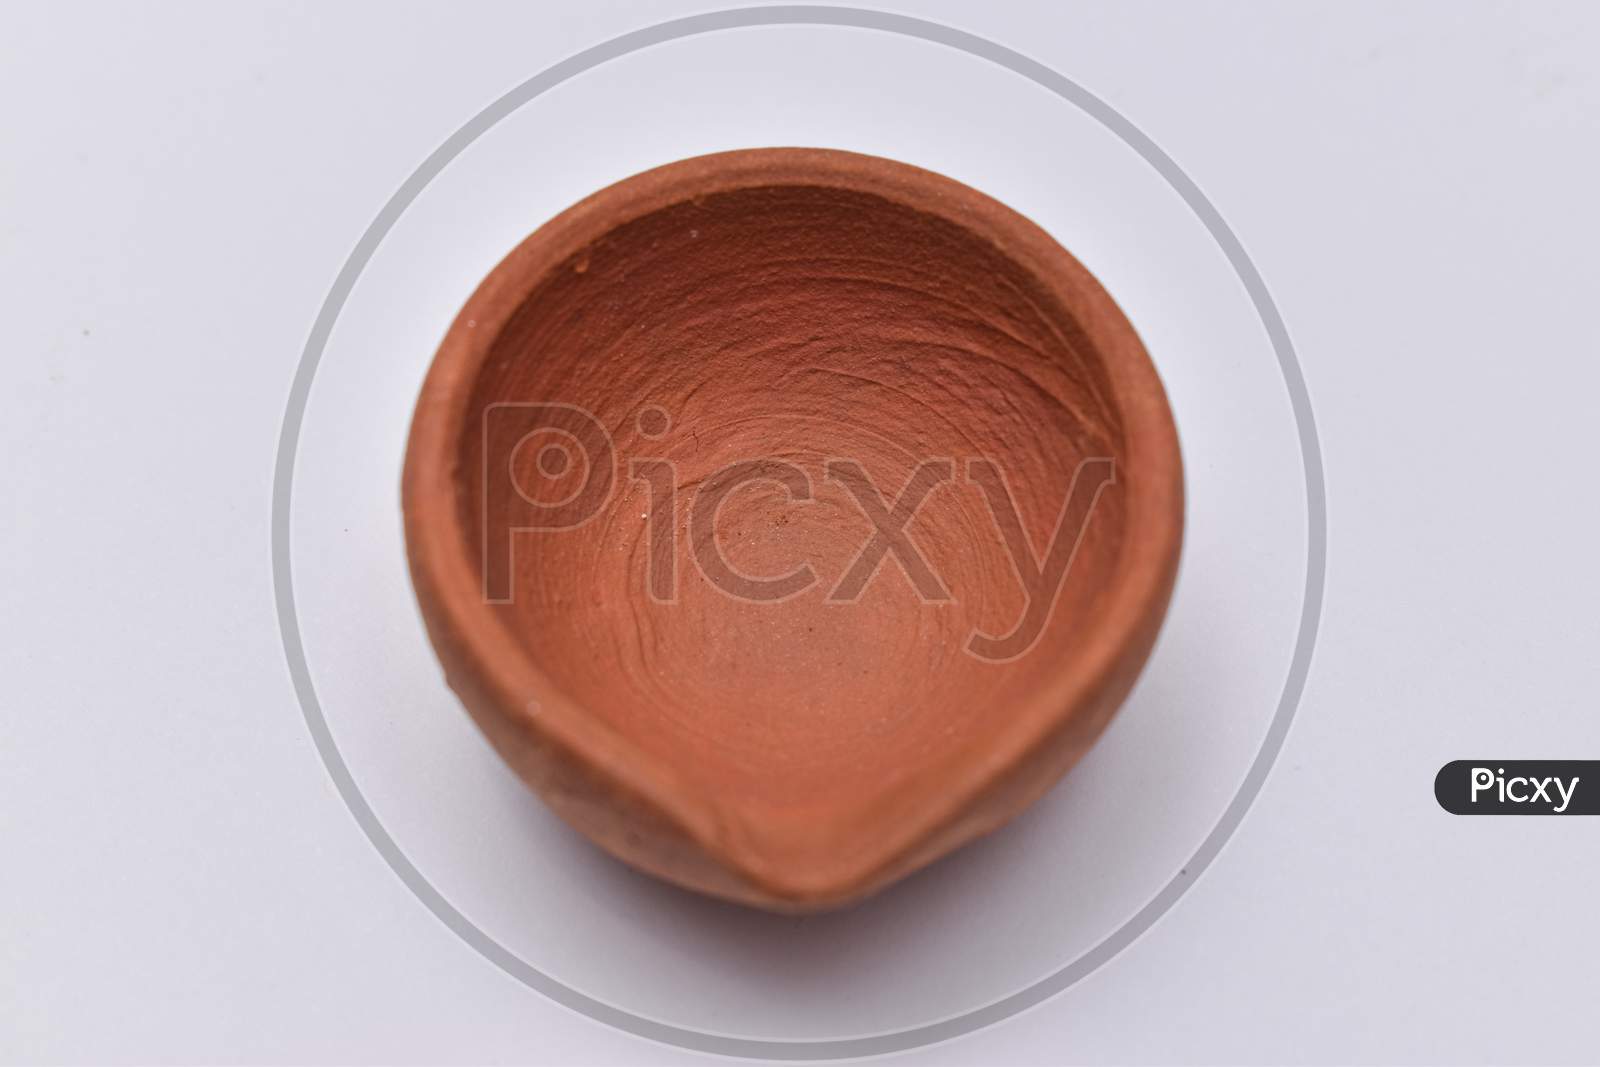 Indian Clay Oil Lamp Or Diya Used For Diwali And Festival Celebration Isolated With White Background